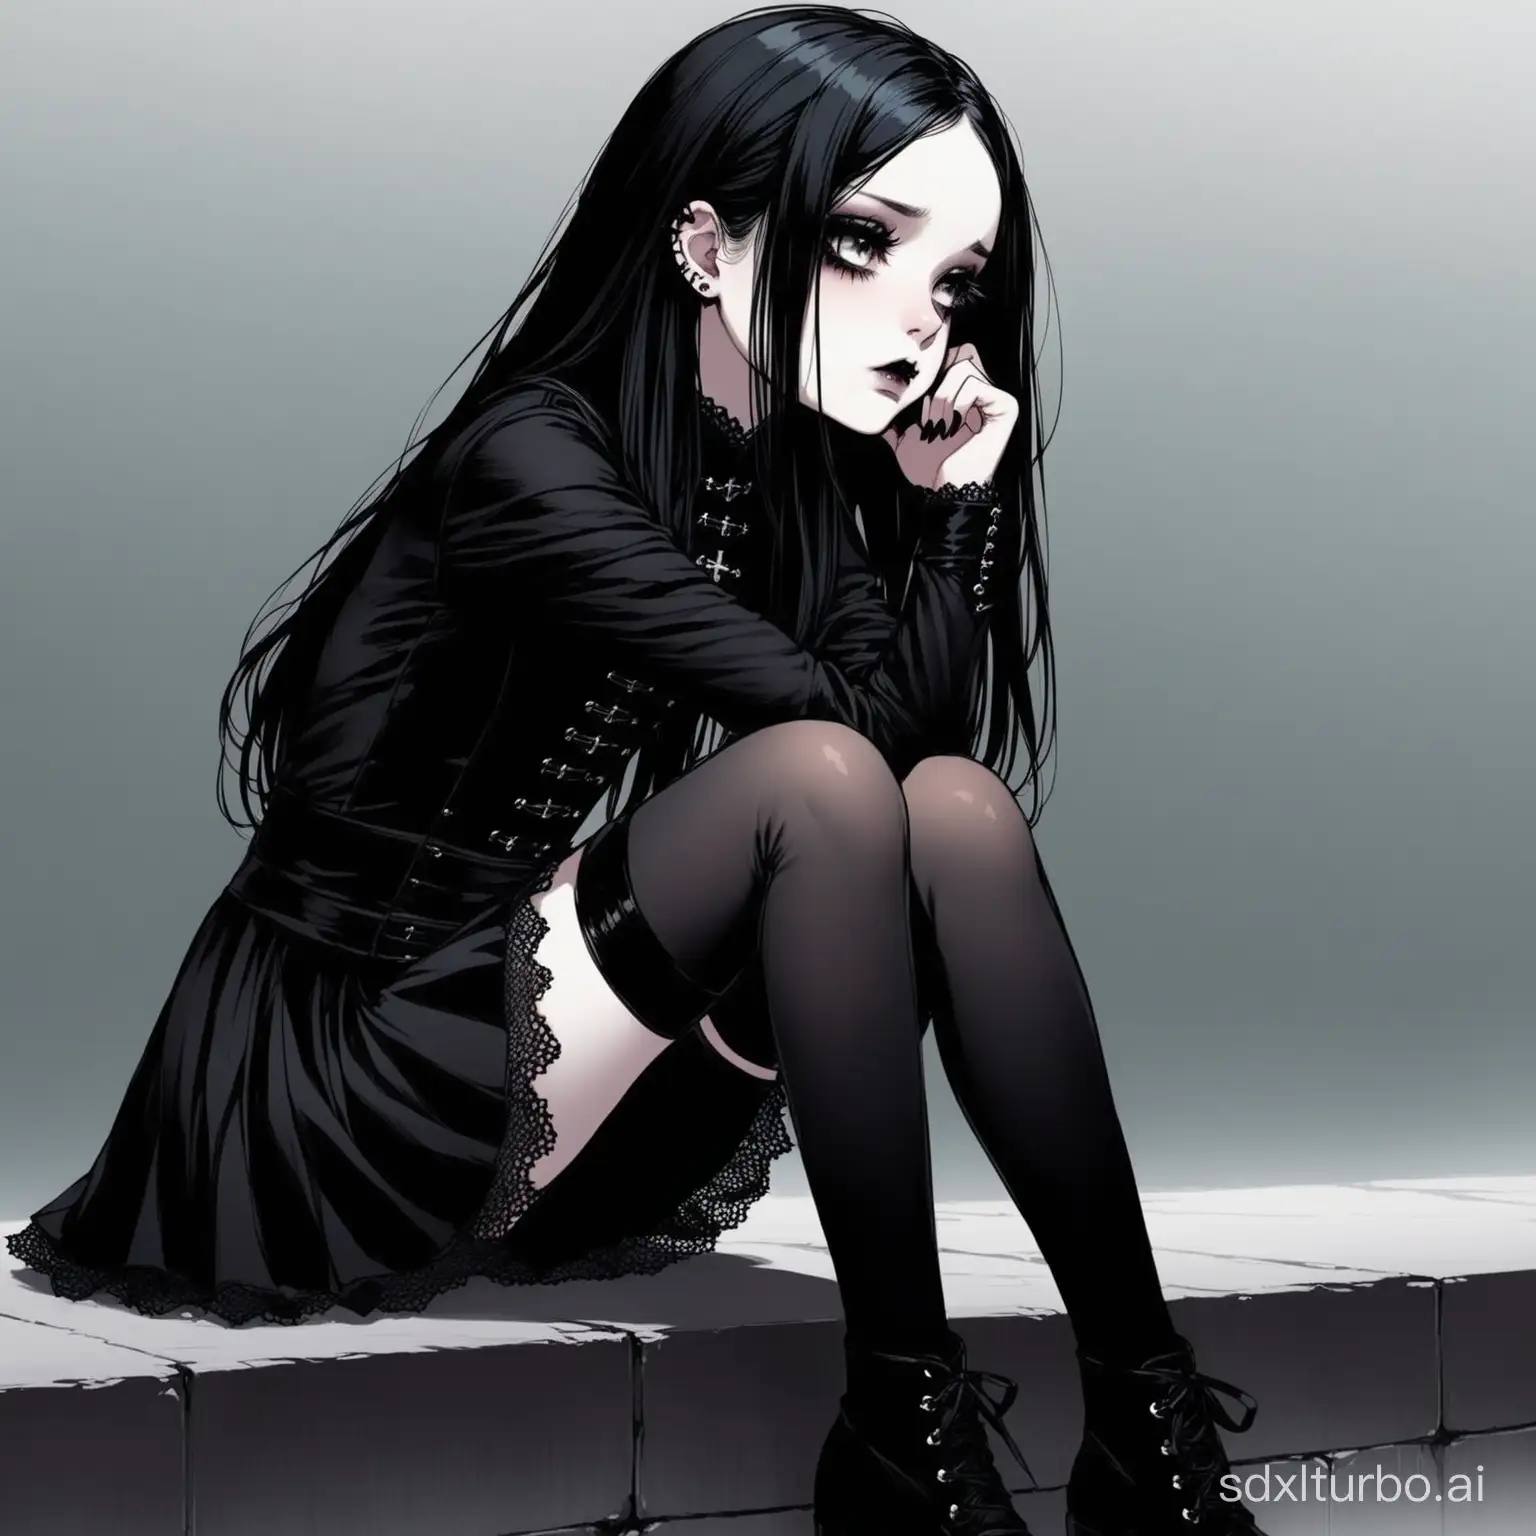 A petite, pale, goth girl, sat in deep thought